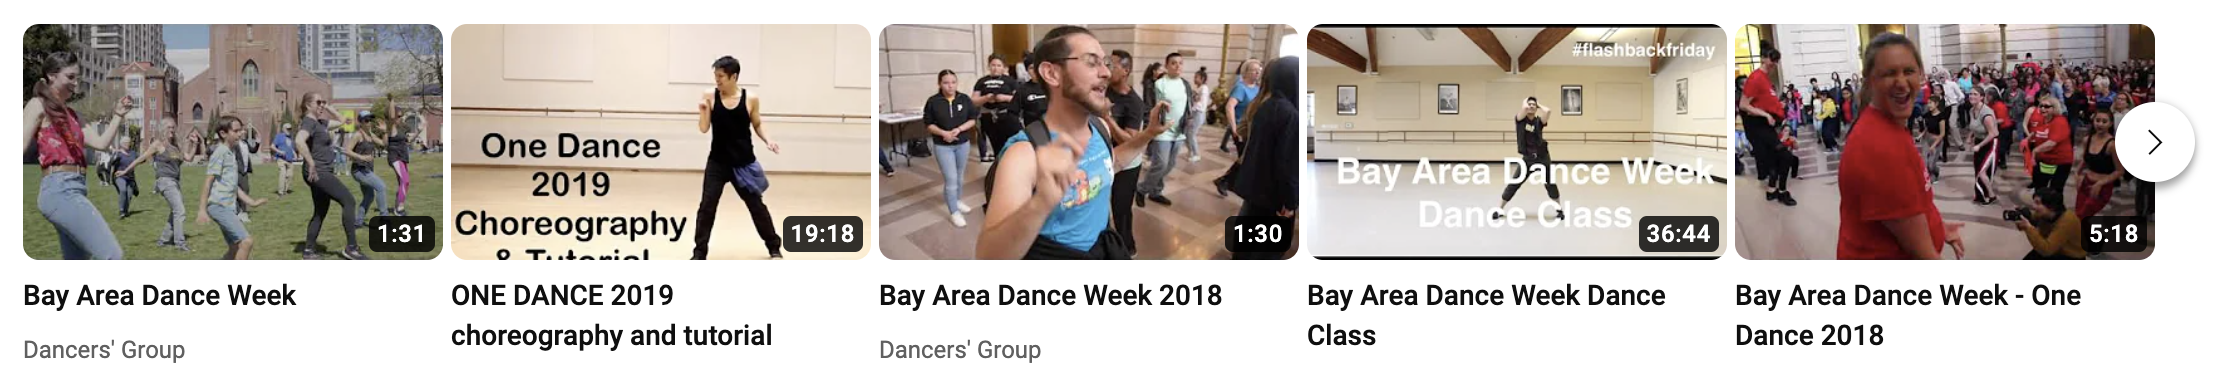 Thumbnail images of six Bay Area Dance week videos on YouTube